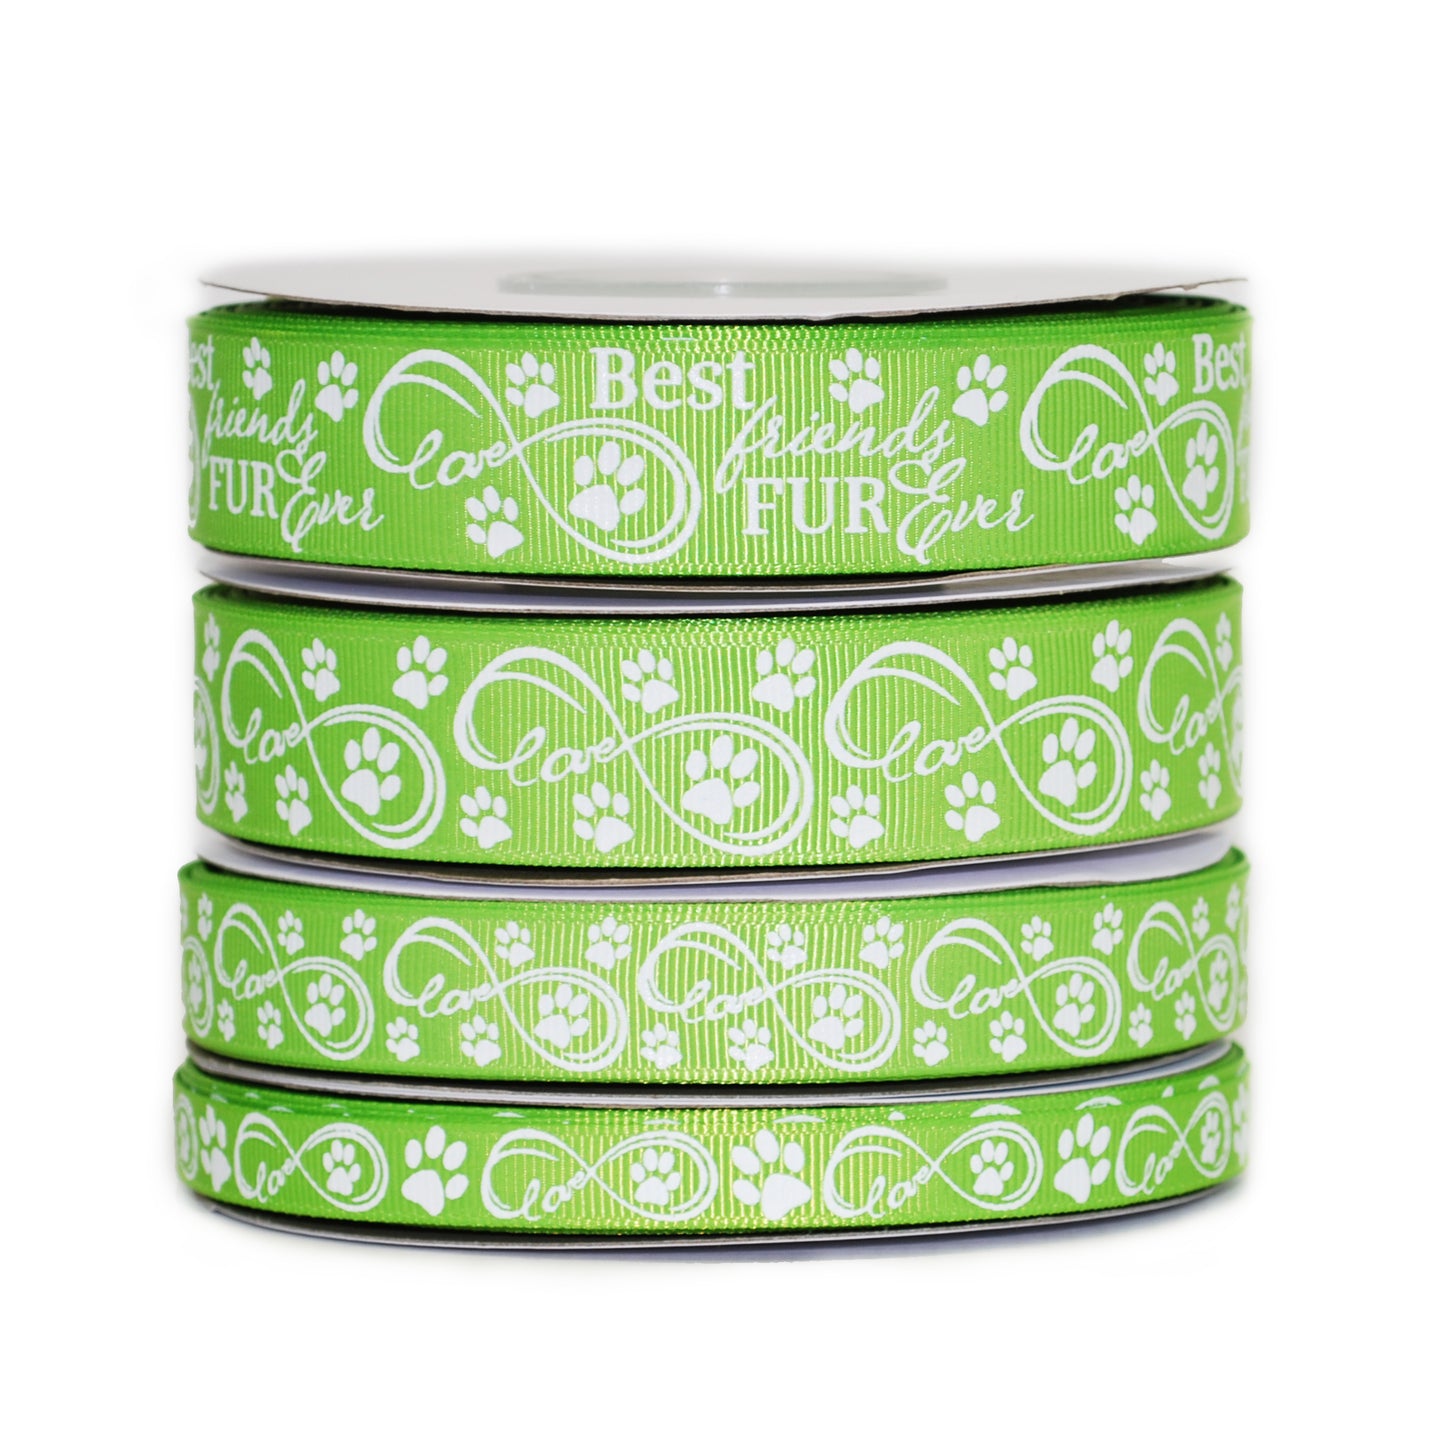 Best Friends Fur Ever Grosgrain Ribbon Collection On Apple Green